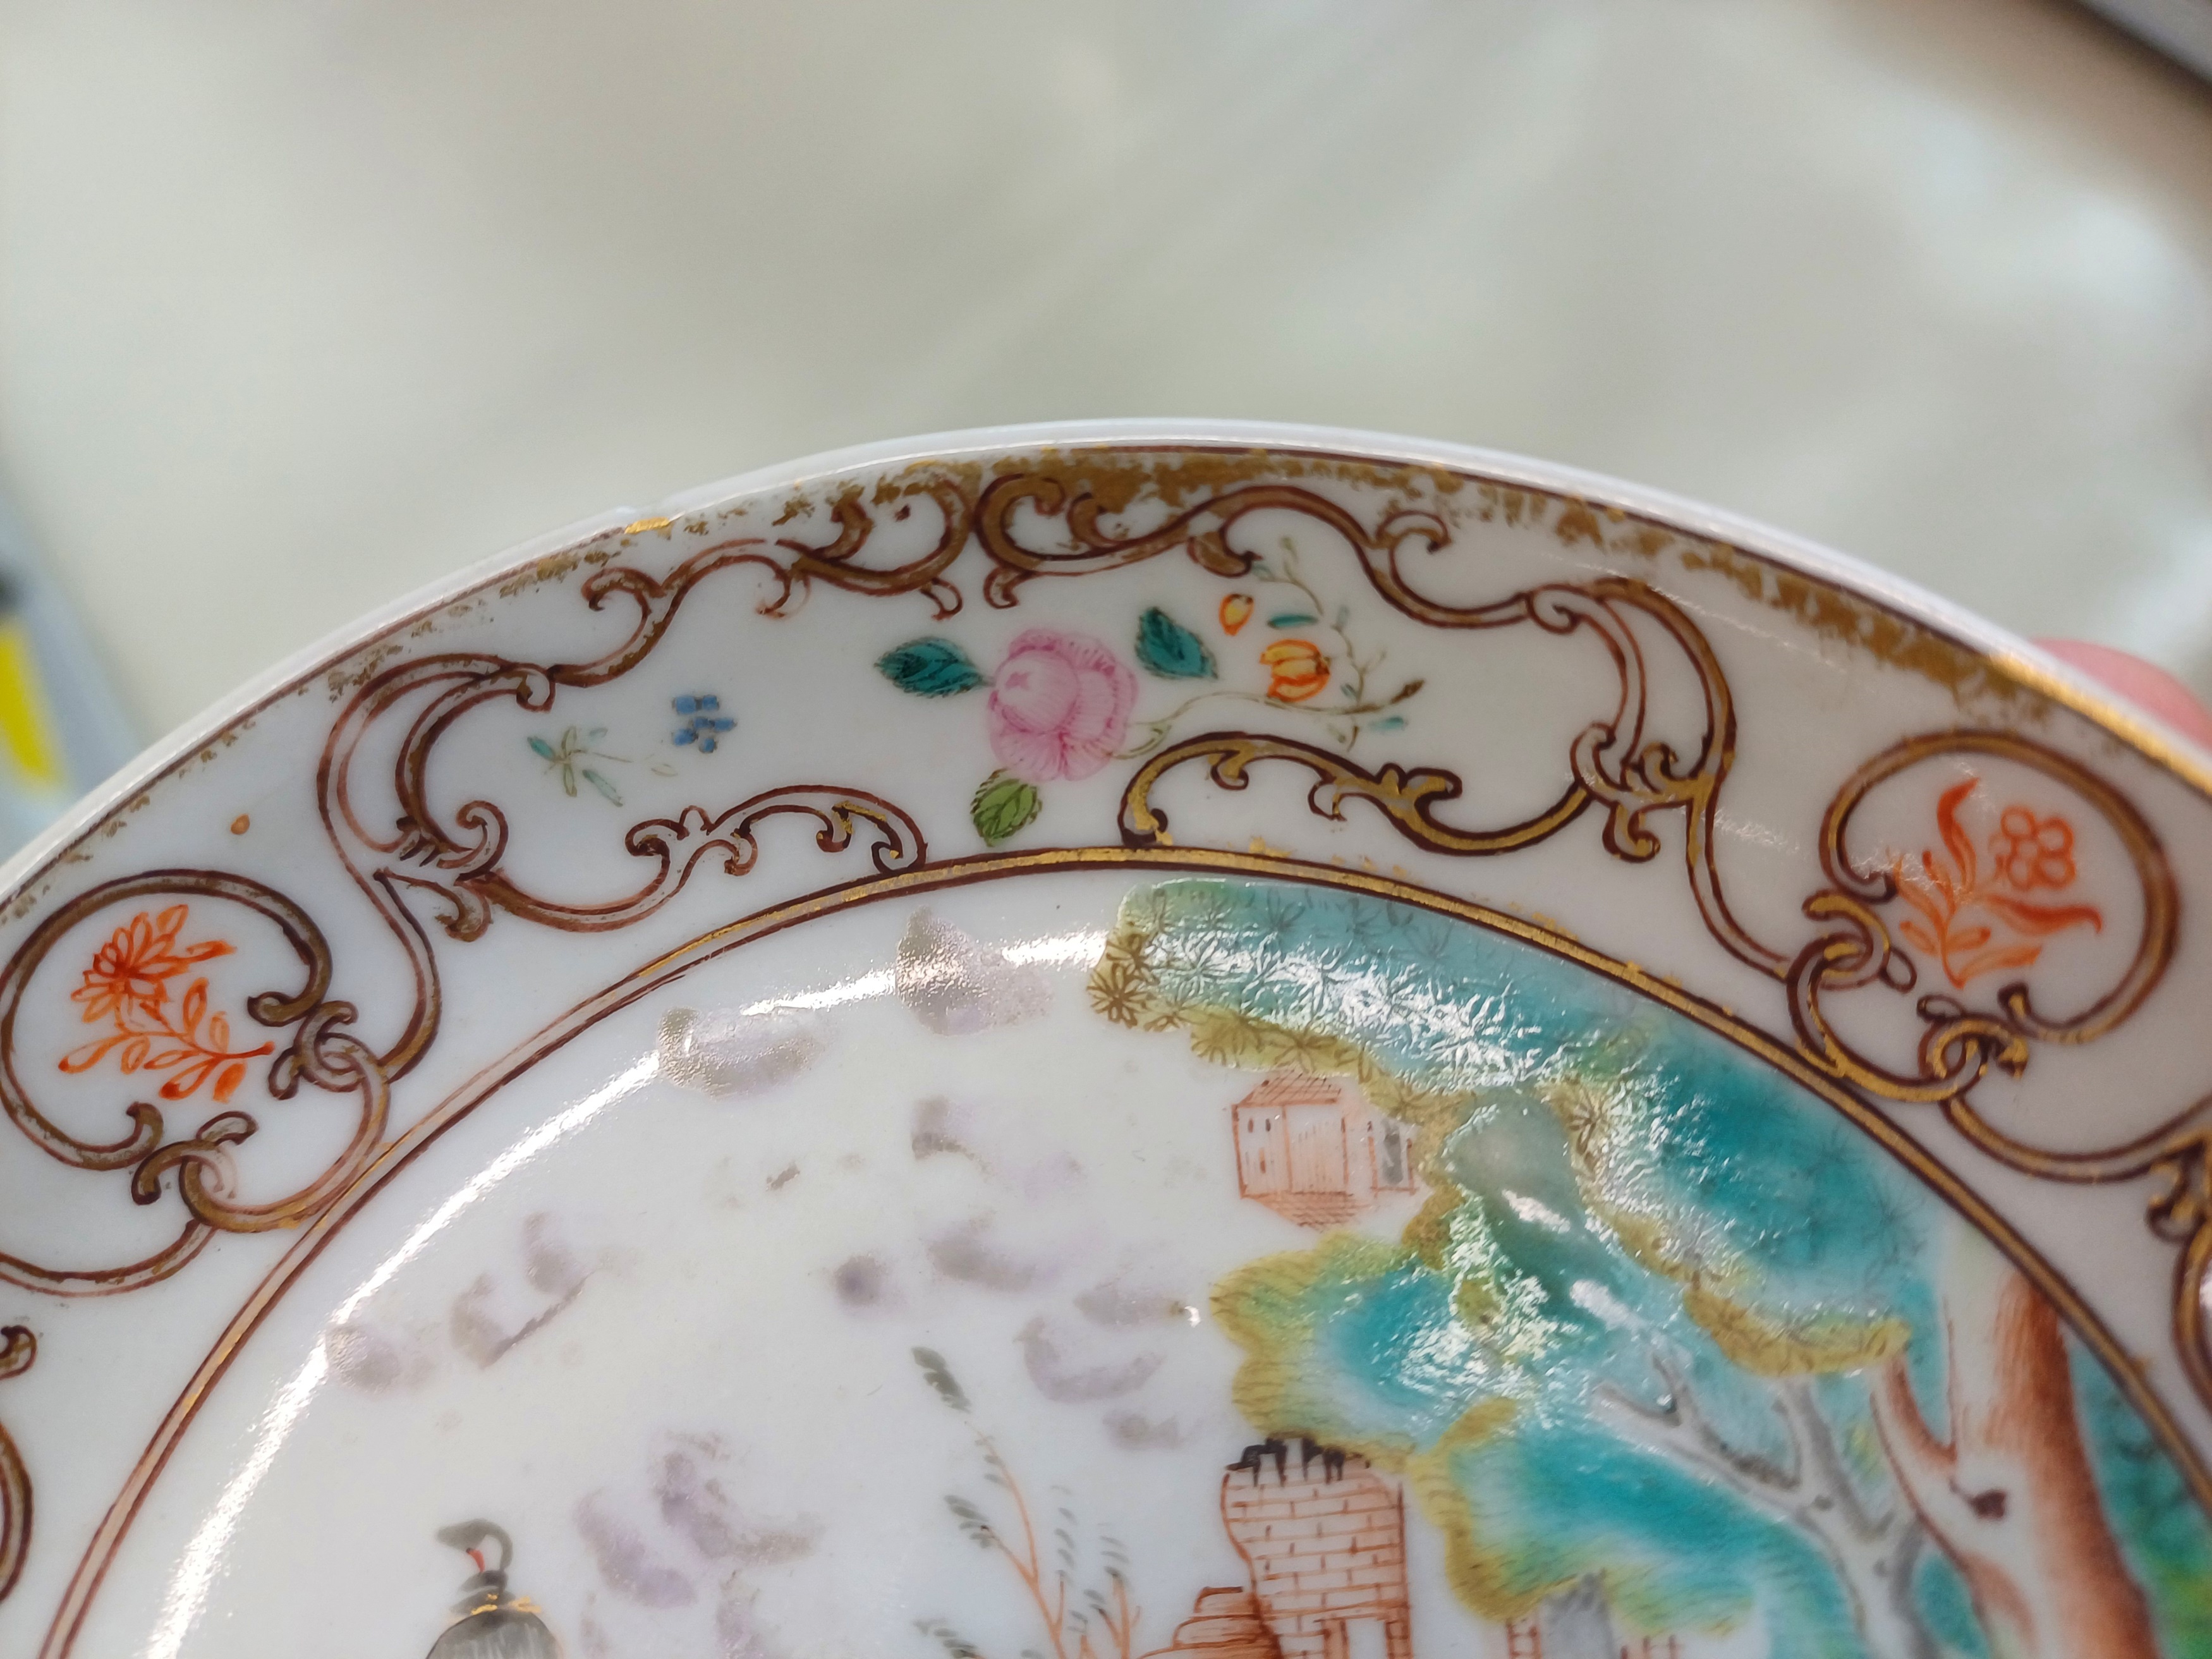 A CHINESE EXPORT FAMILLE-ROSE SAUCER 清乾隆 外銷粉彩人物故事圖紋盤 - Image 2 of 8